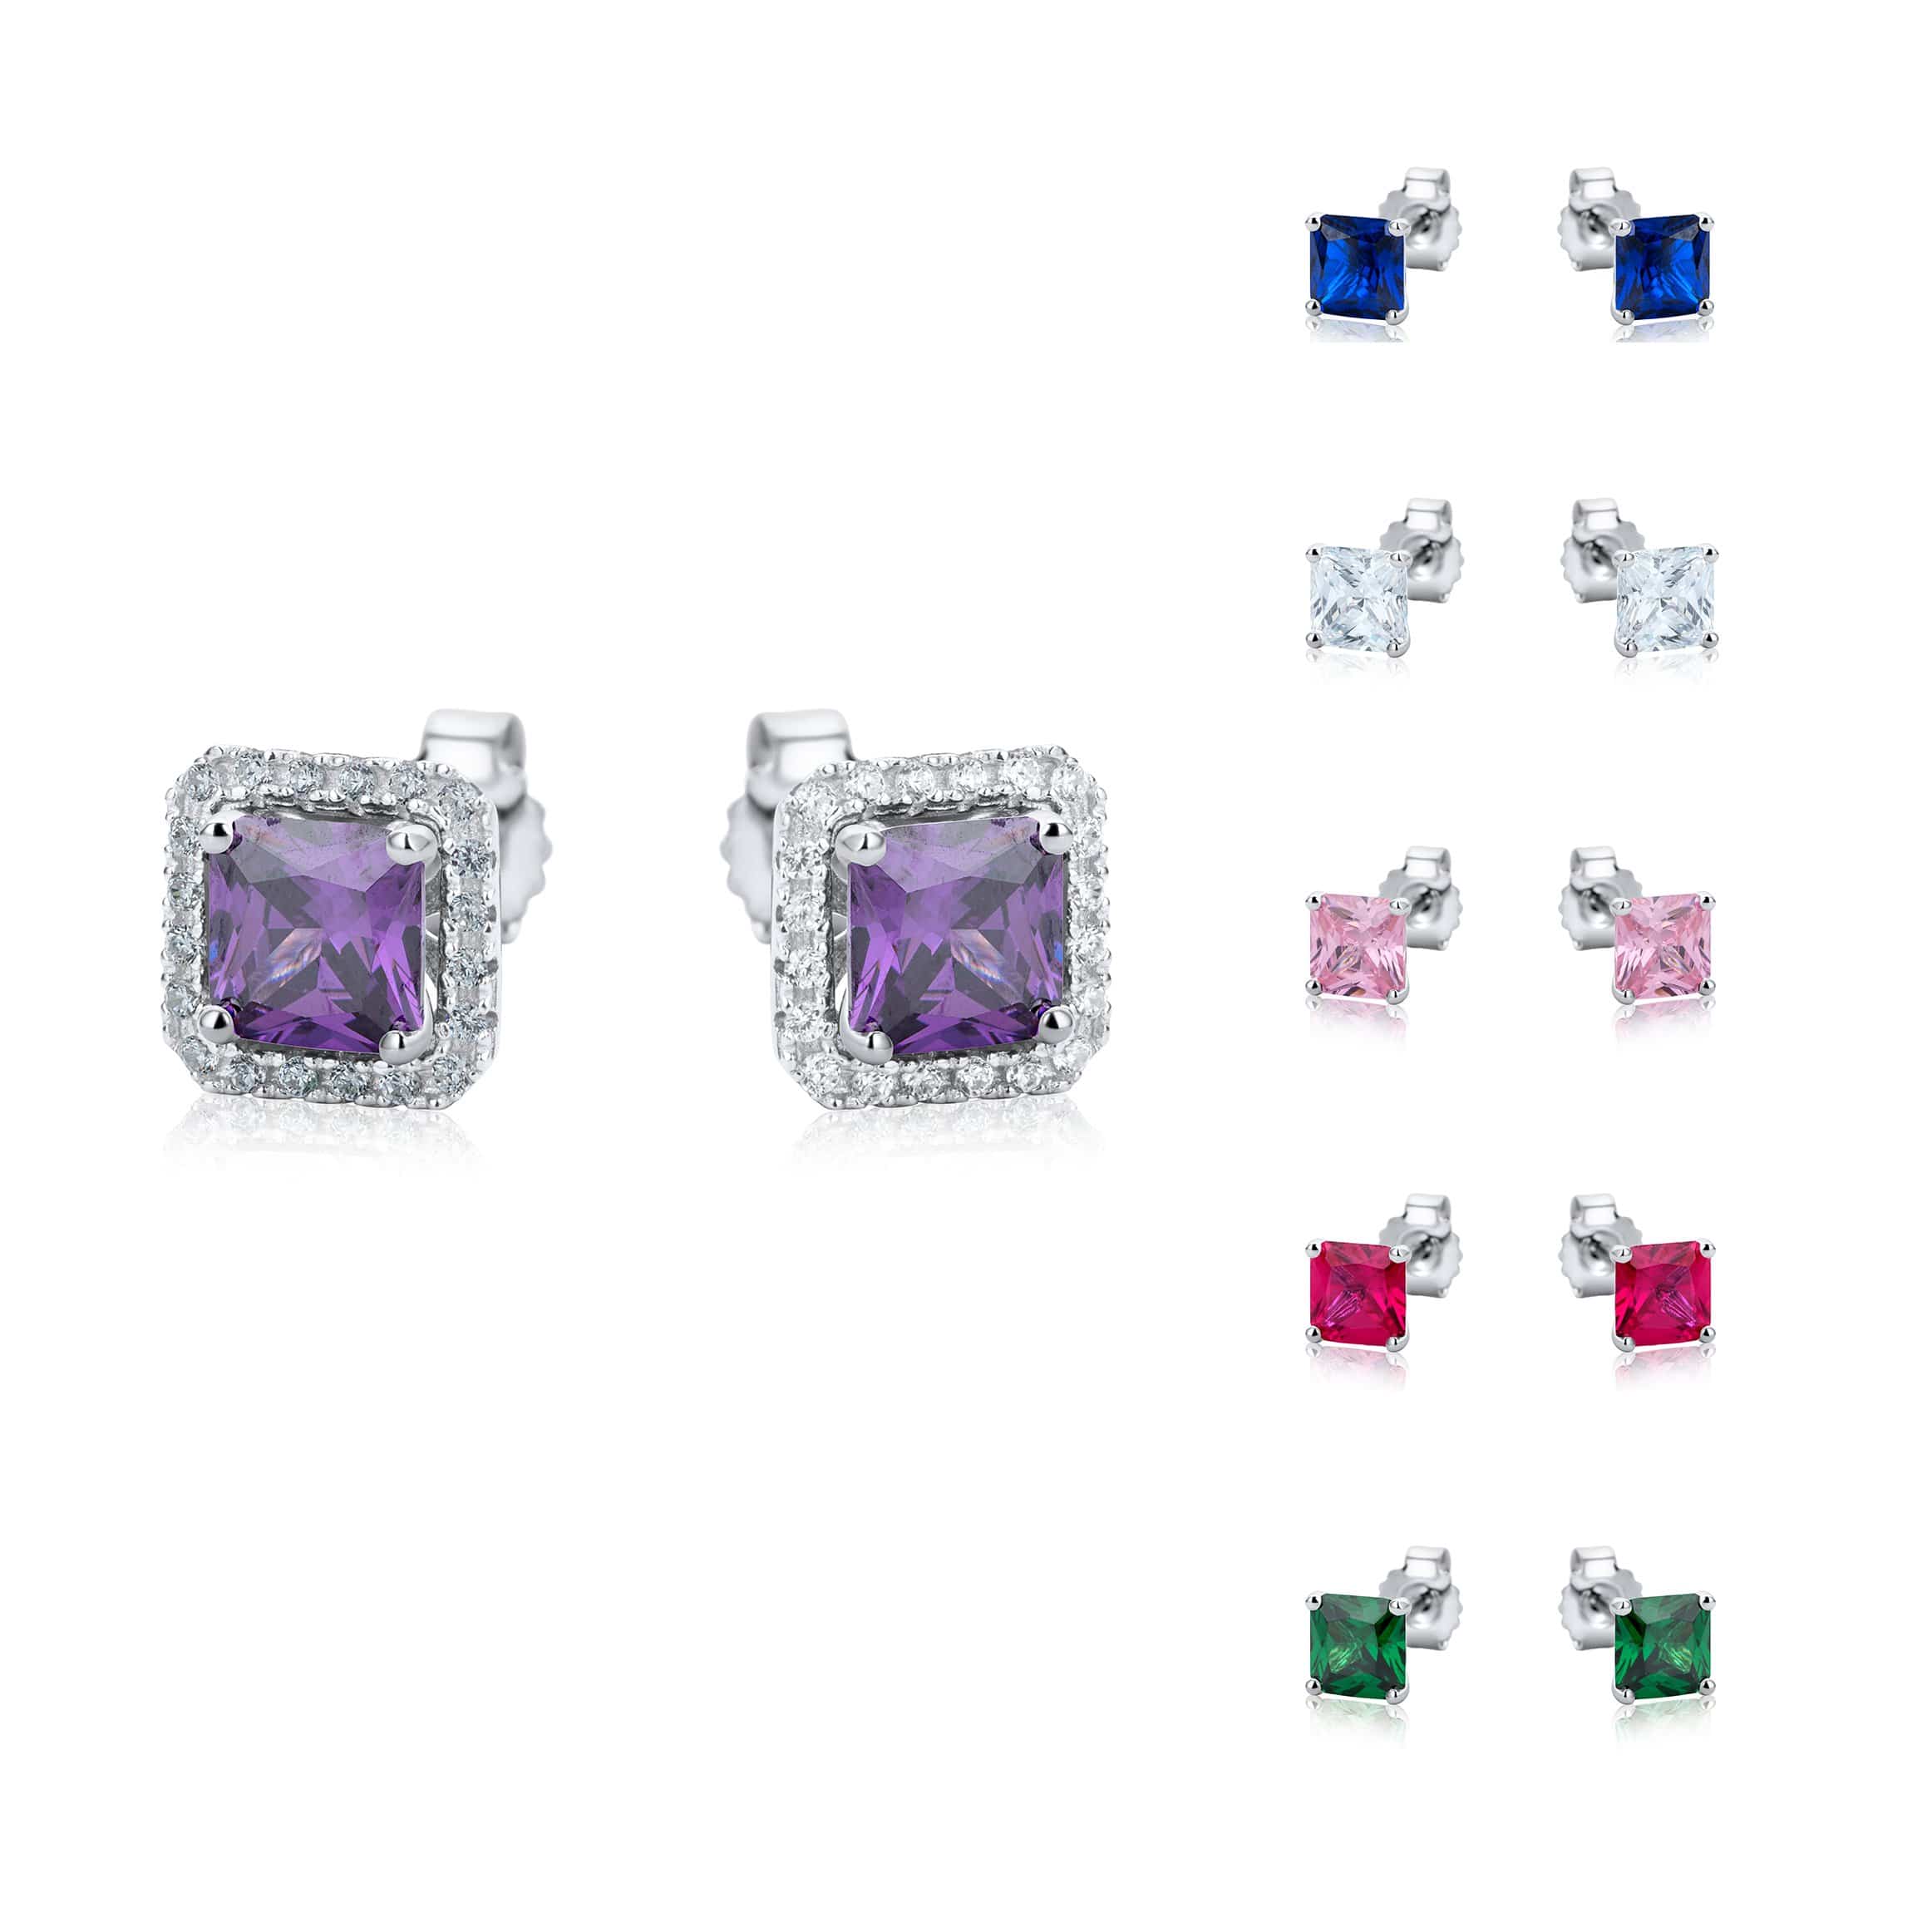 Lynora Jewellery Earring Sterling Silver Square Multicolour Stud Set Sterling Silver